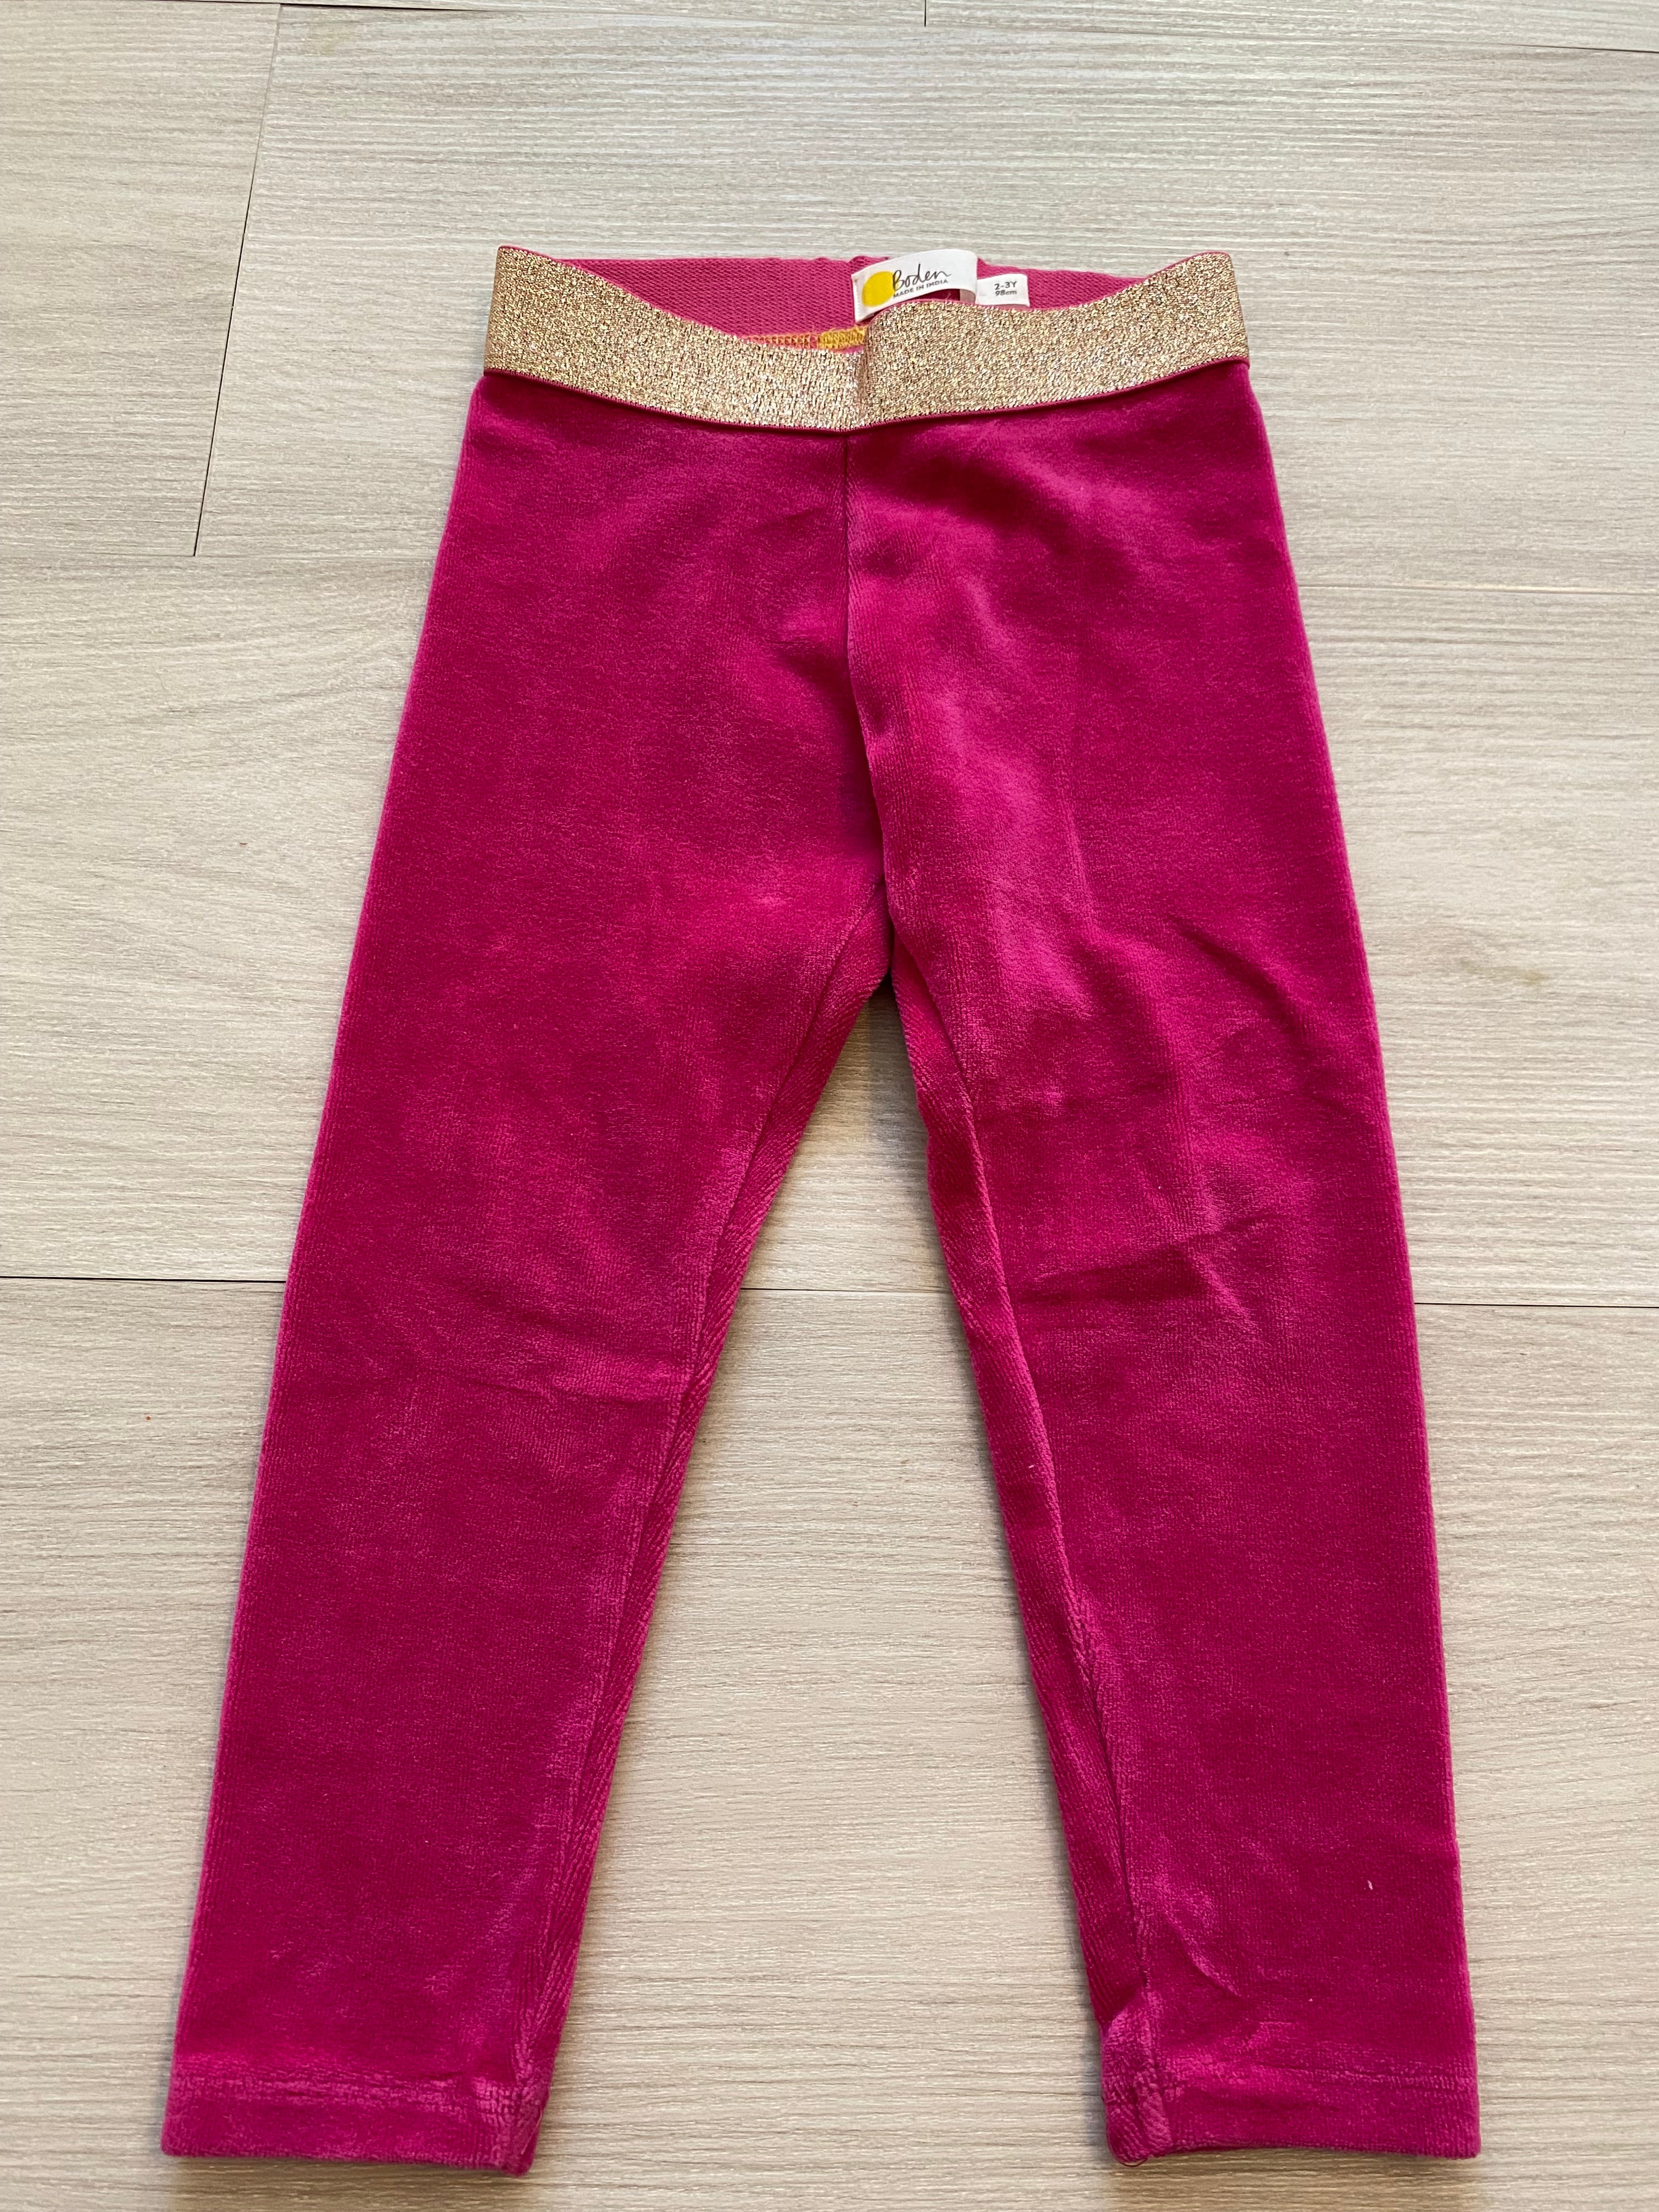 Mini Boden Leggings size 2/3 – Another Breath Consignment